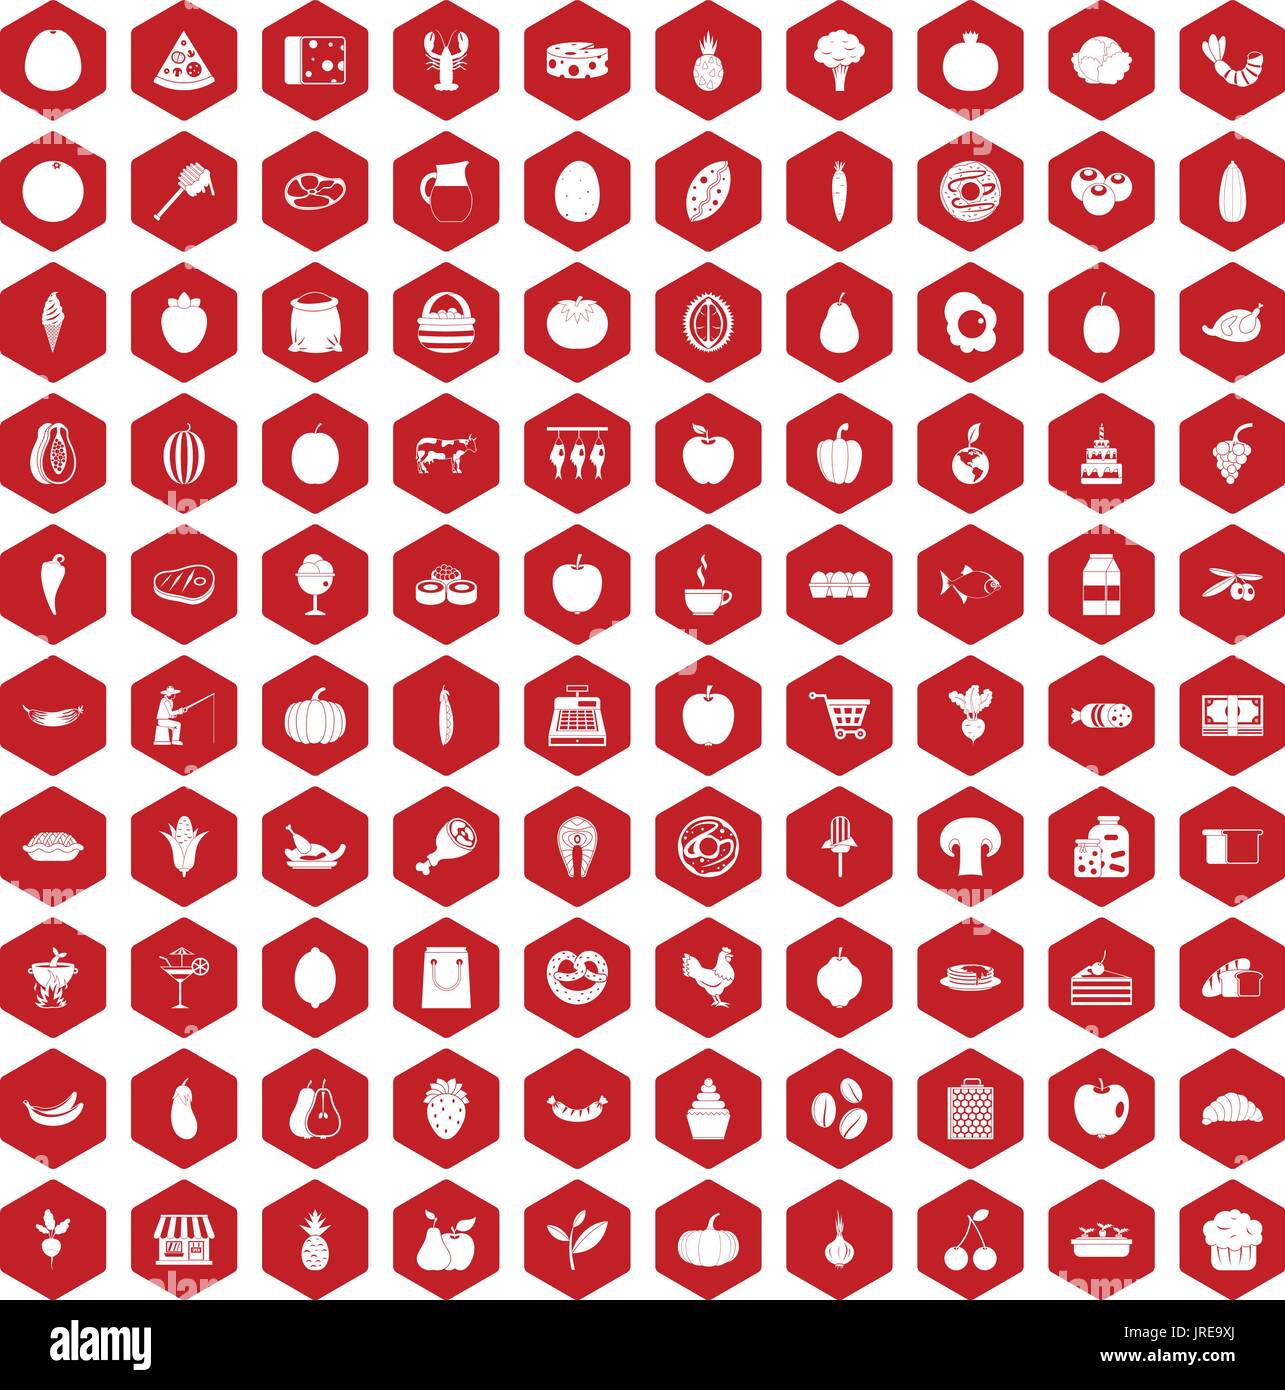 100 natural products icons hexagon red Stock Vector